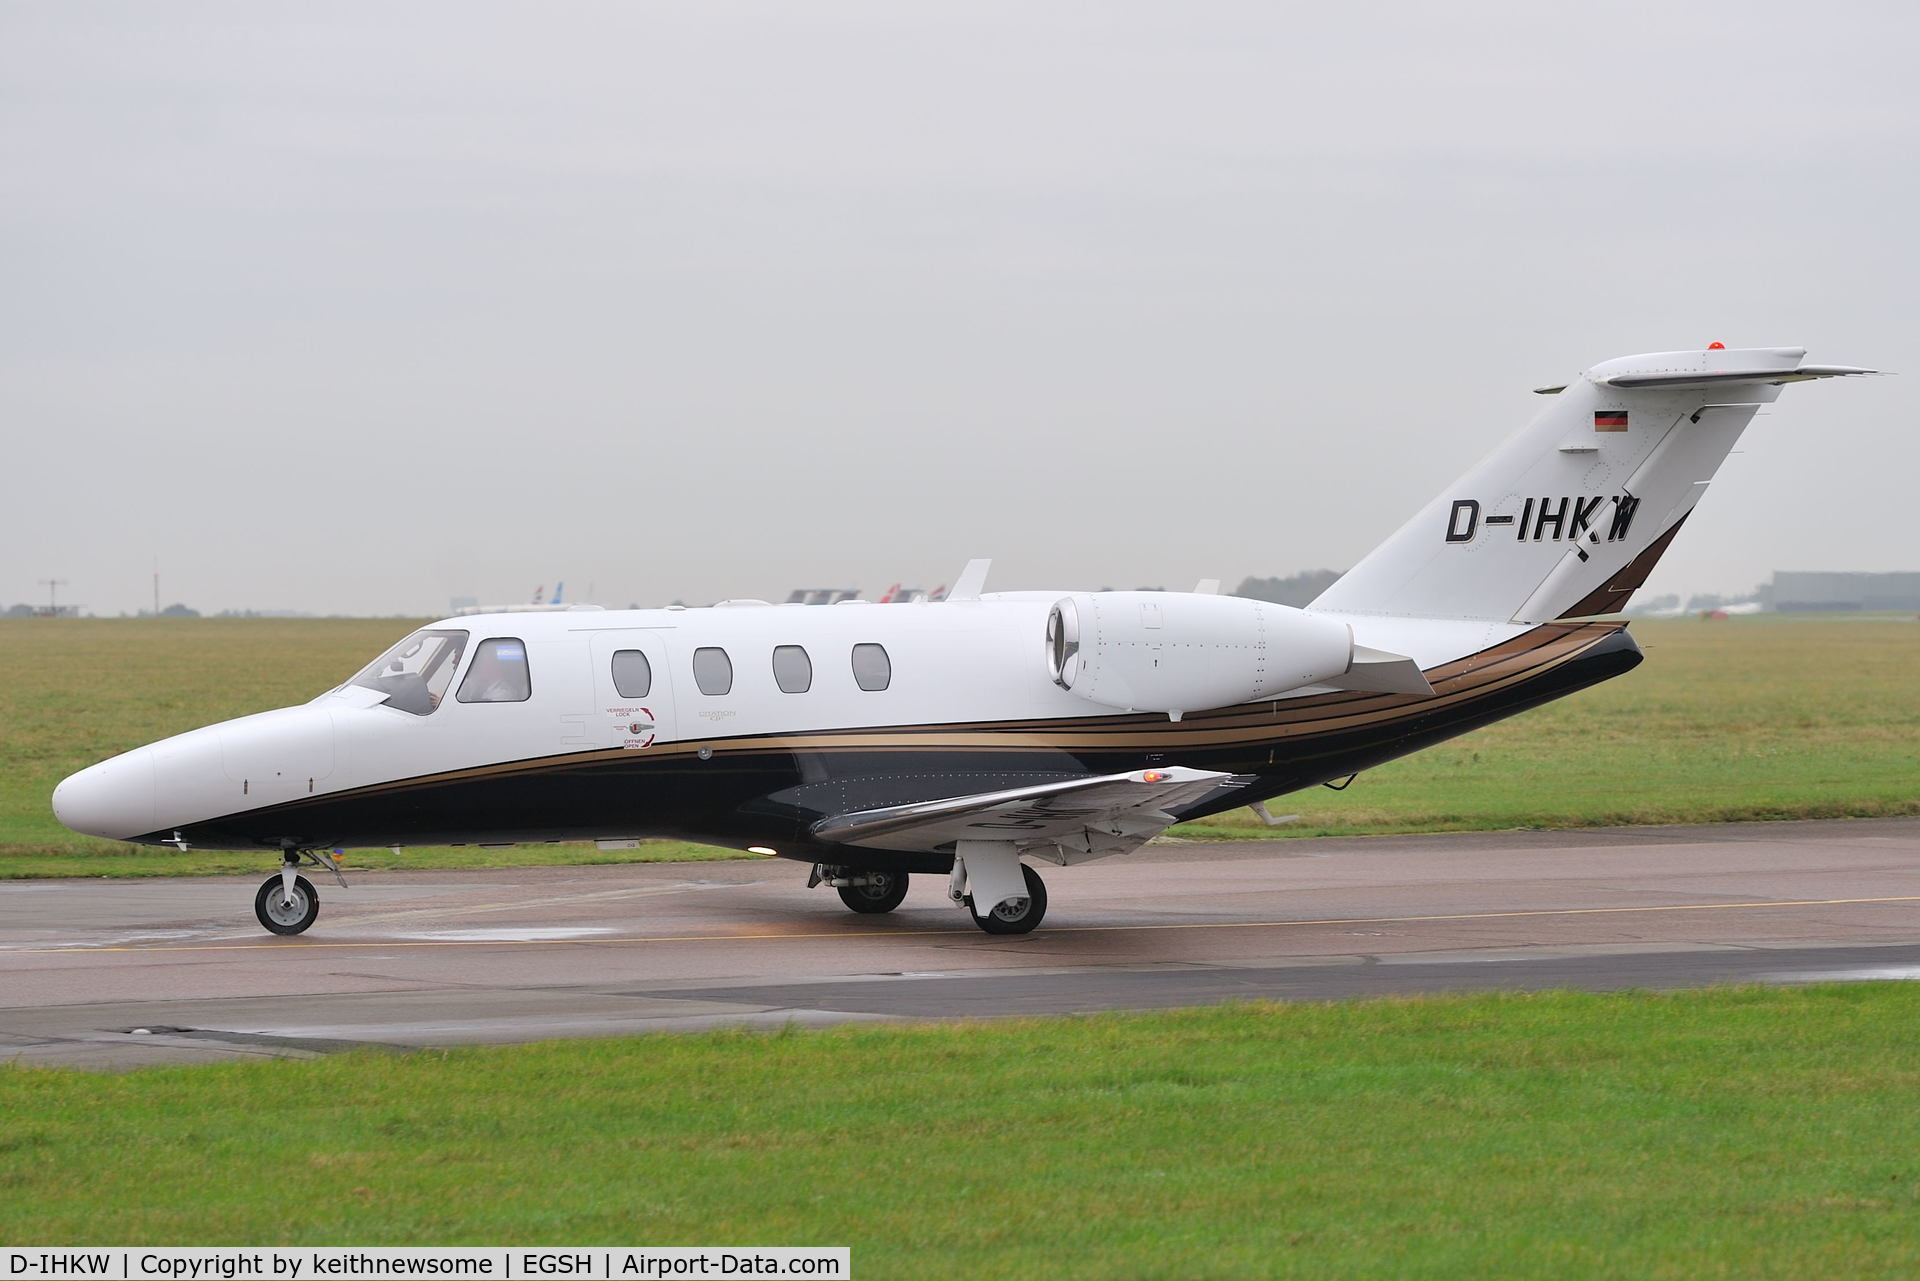 D-IHKW, 2008 Cessna 525 CitationJet CJ1+ C/N 525-0677, Arriving at Norwich from Paderborn, Germany.